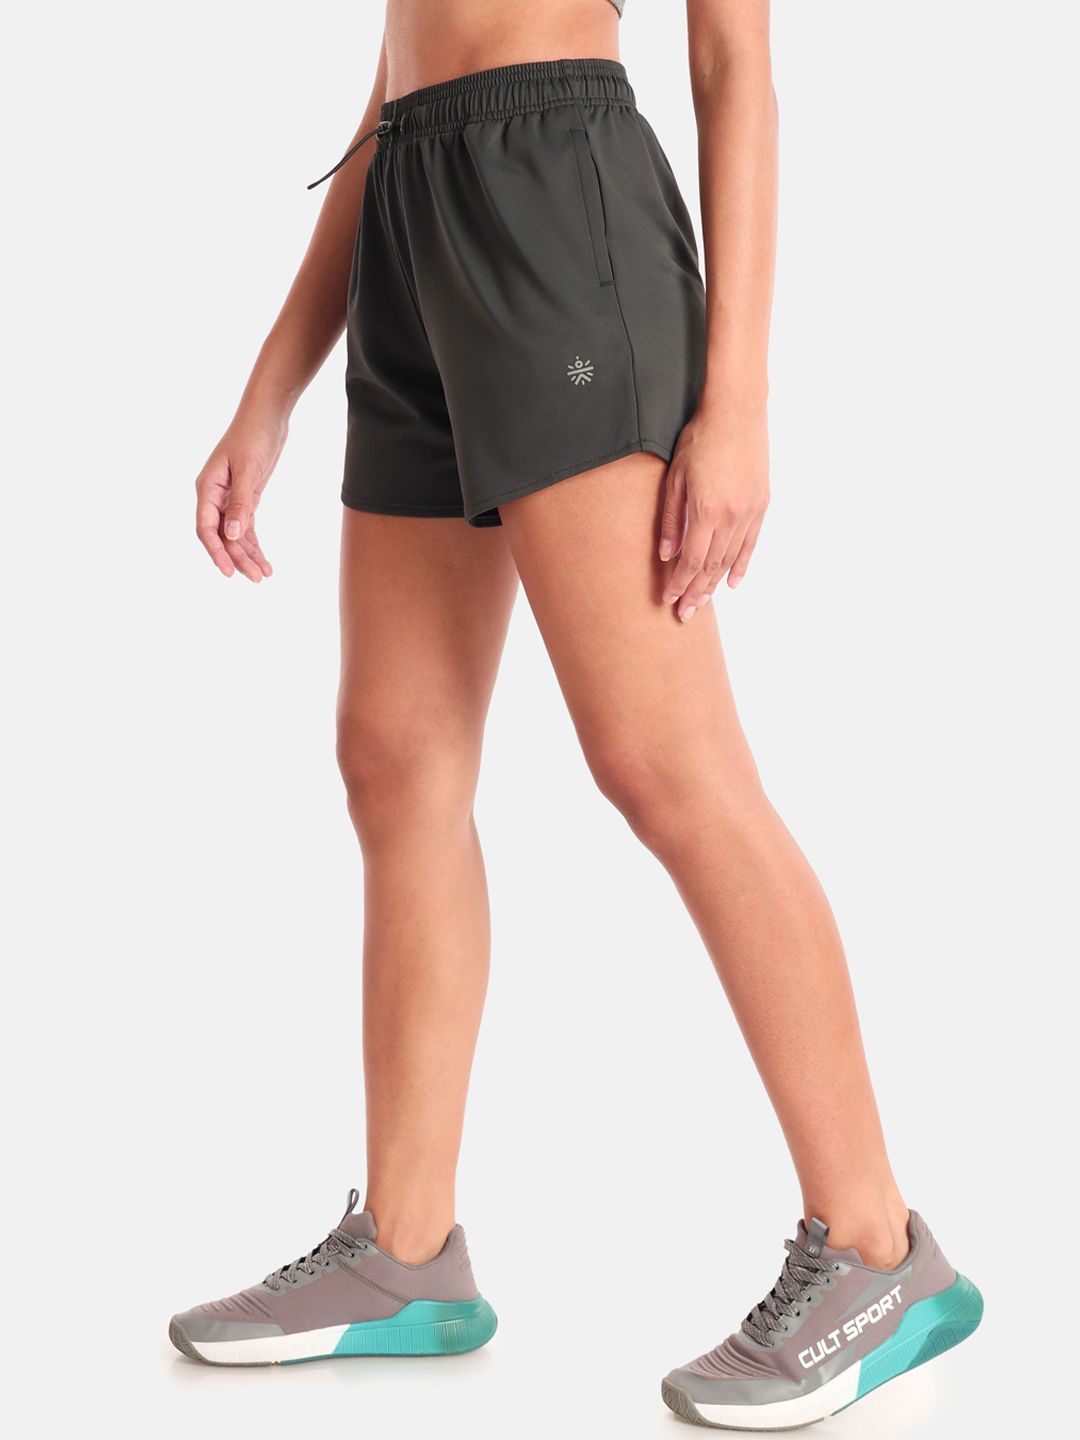 Cultsport Women Mid-Rise Fly Dry Sports Shorts Price in India